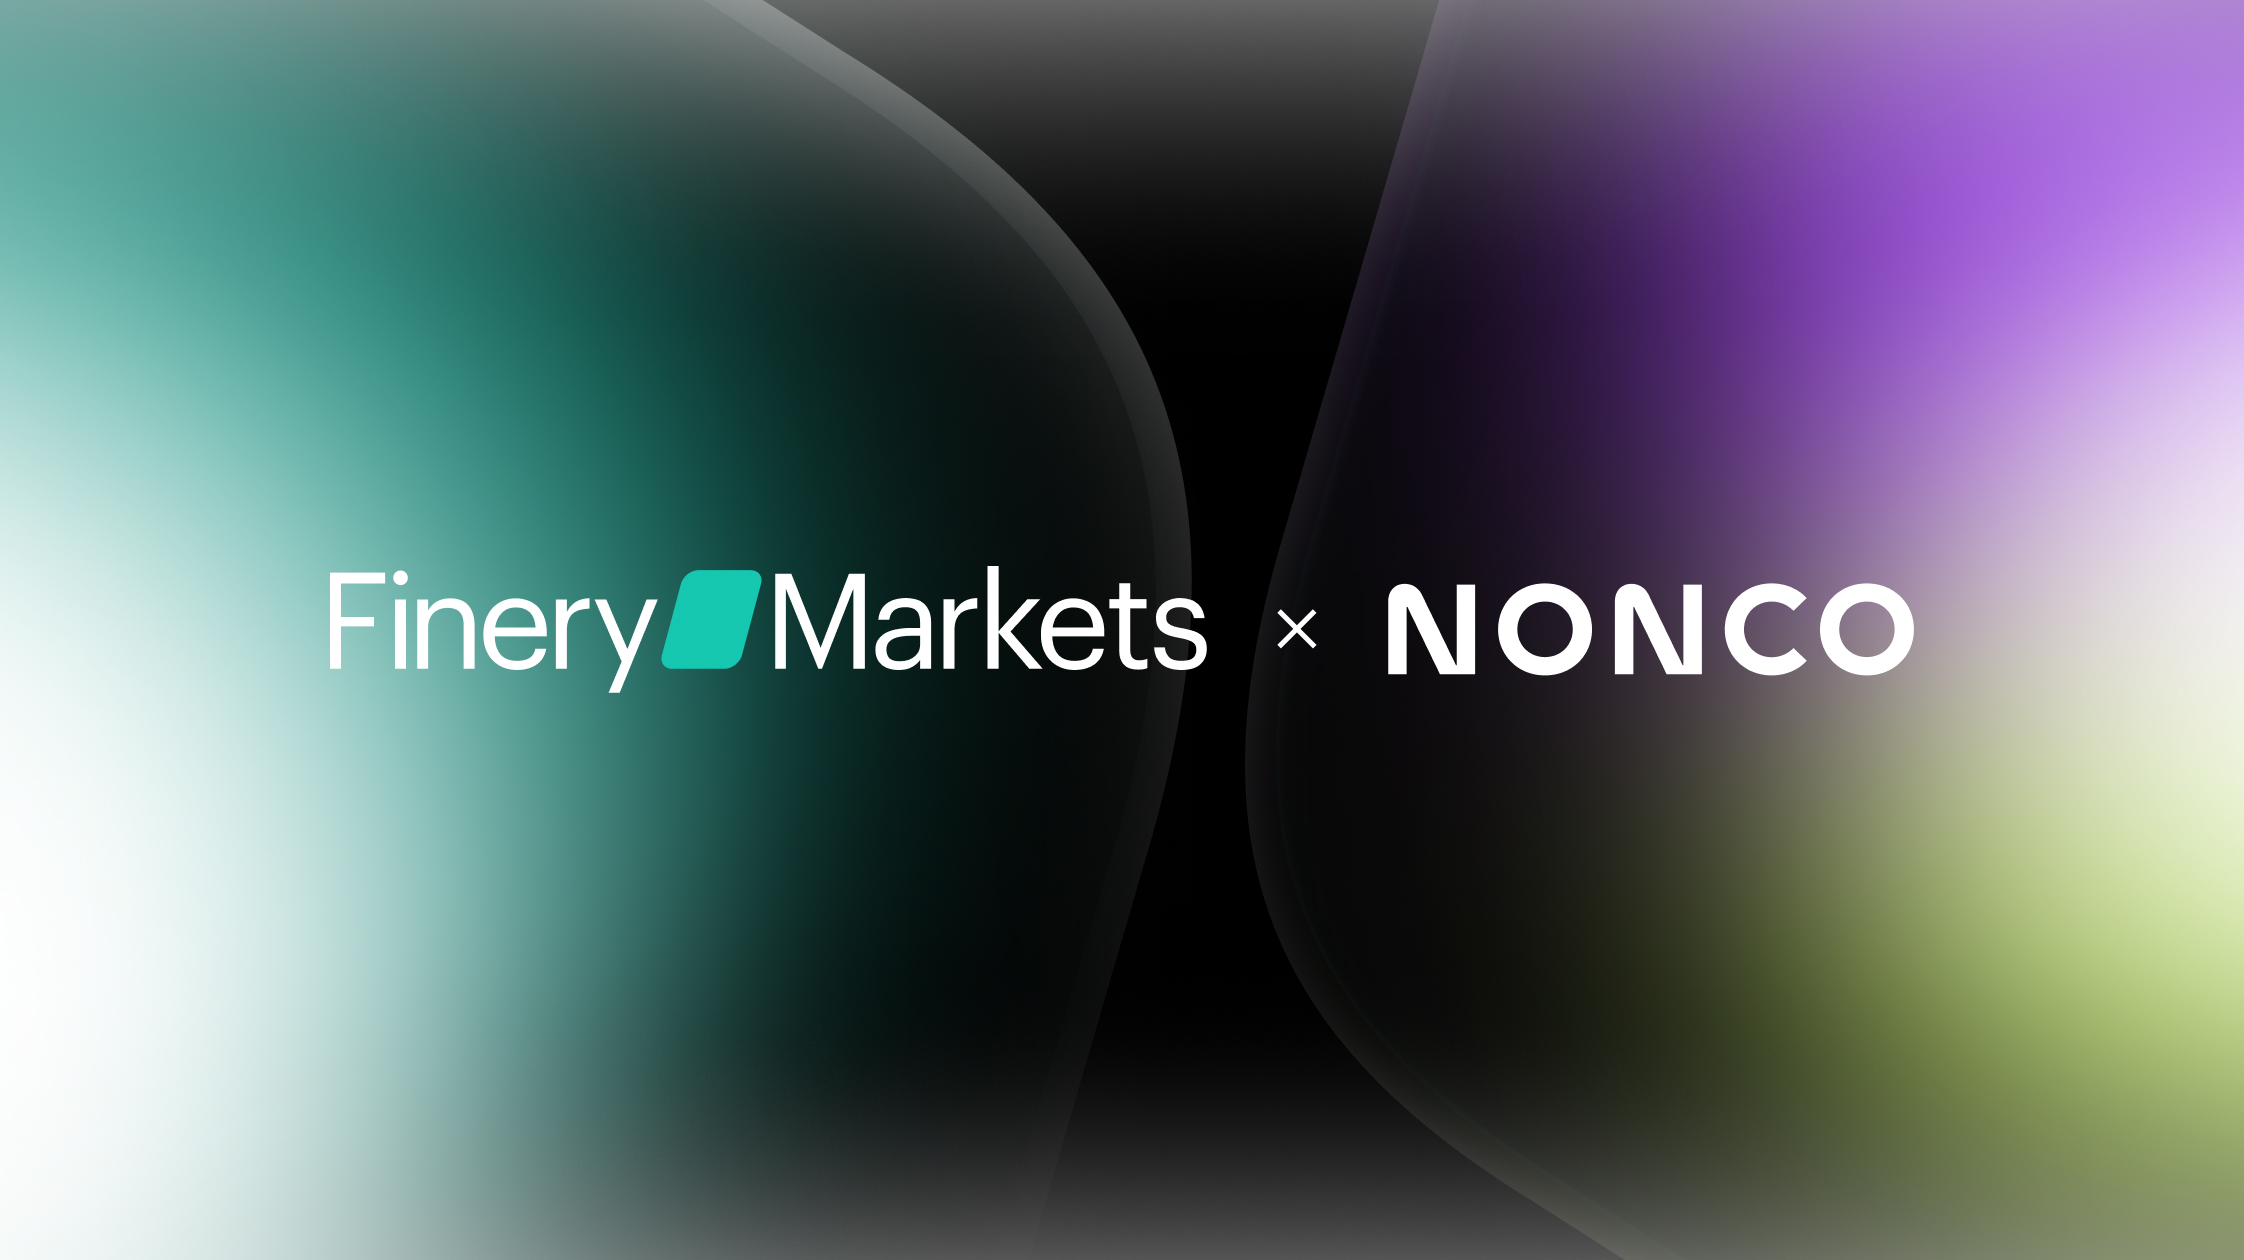 Digital Asset Firm Nonco secures first OTC trade via Finery Markets